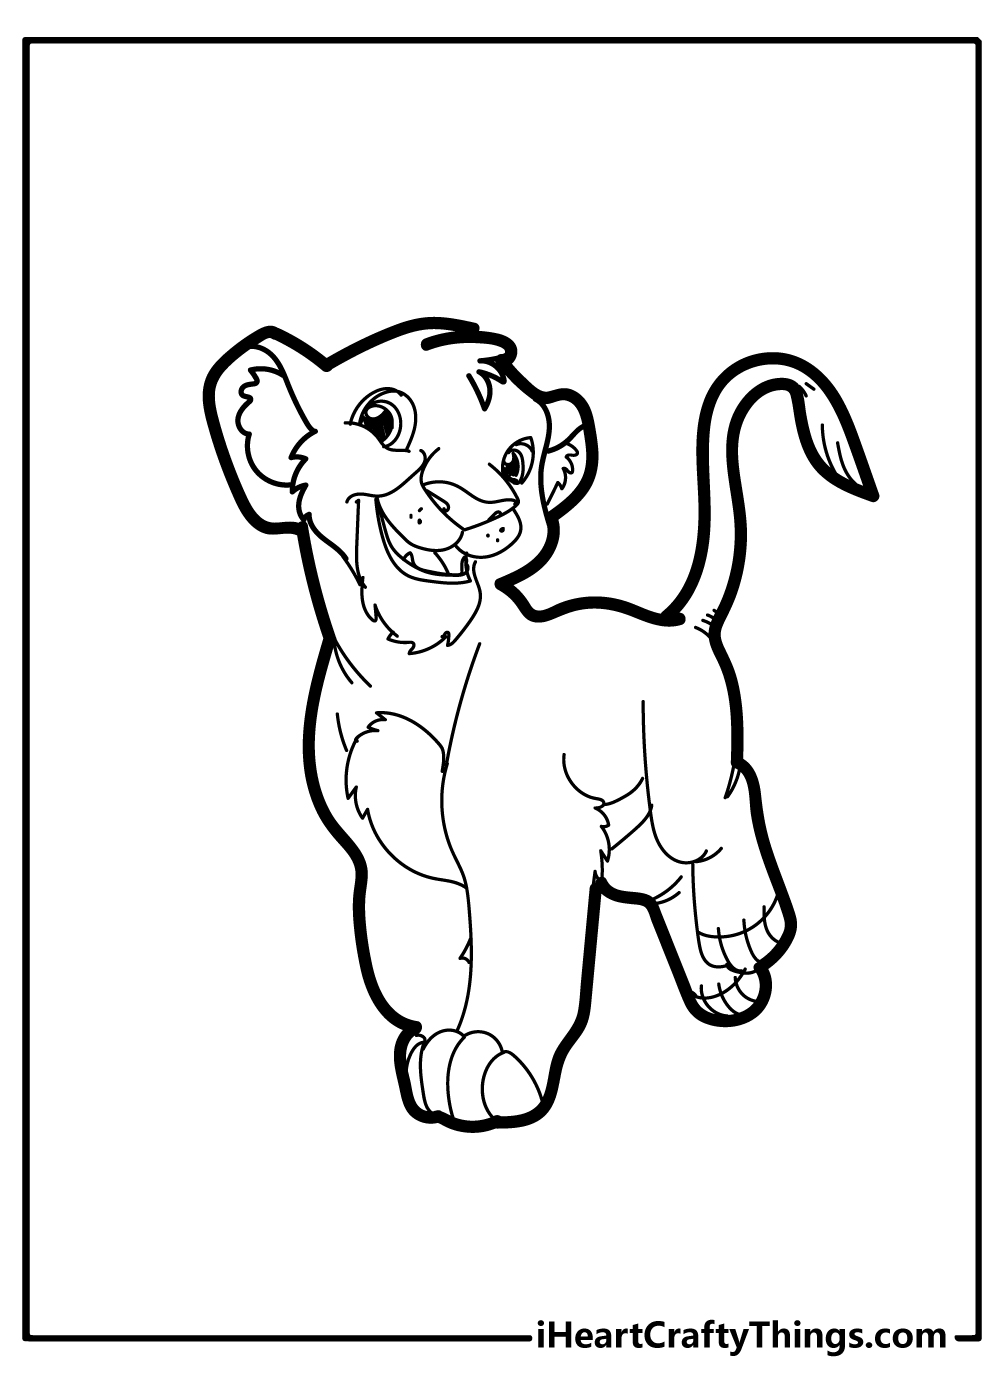 Printable Lion Coloring Pages Updated 21